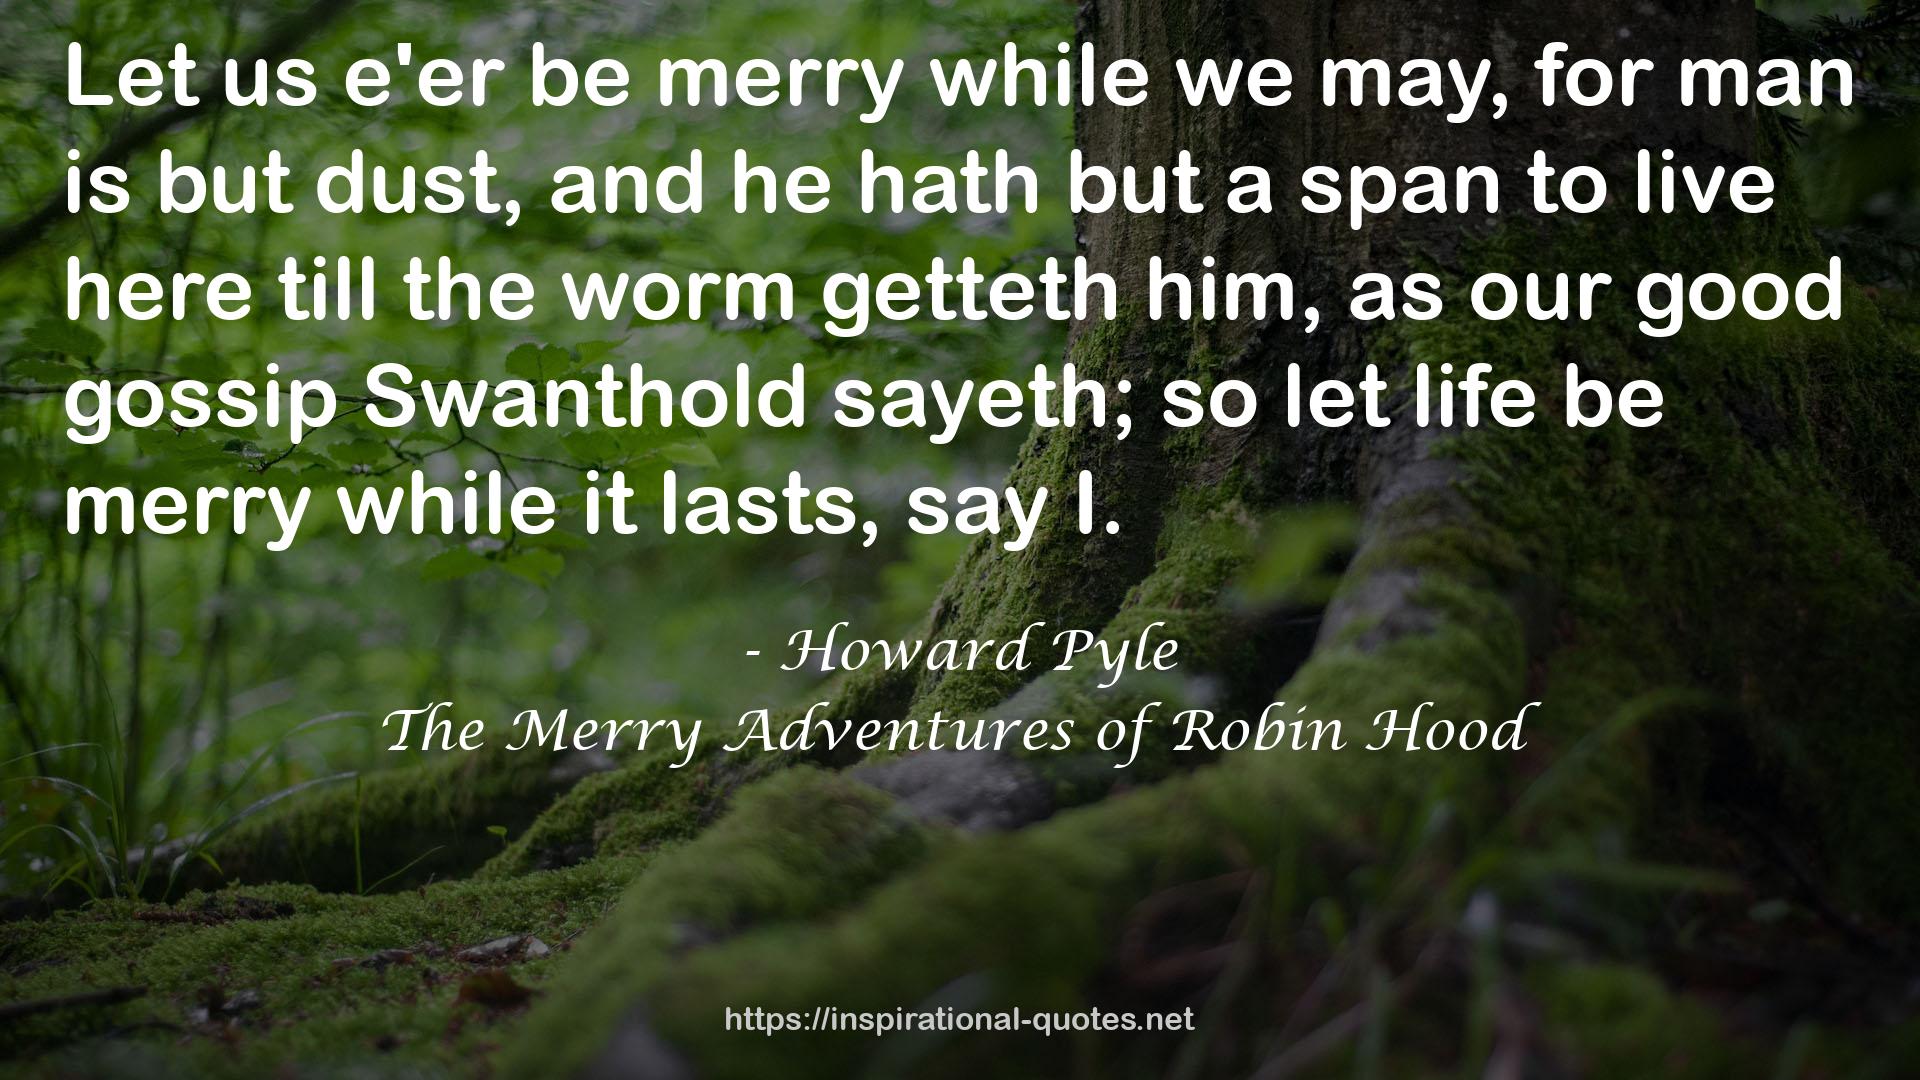 The Merry Adventures of Robin Hood QUOTES